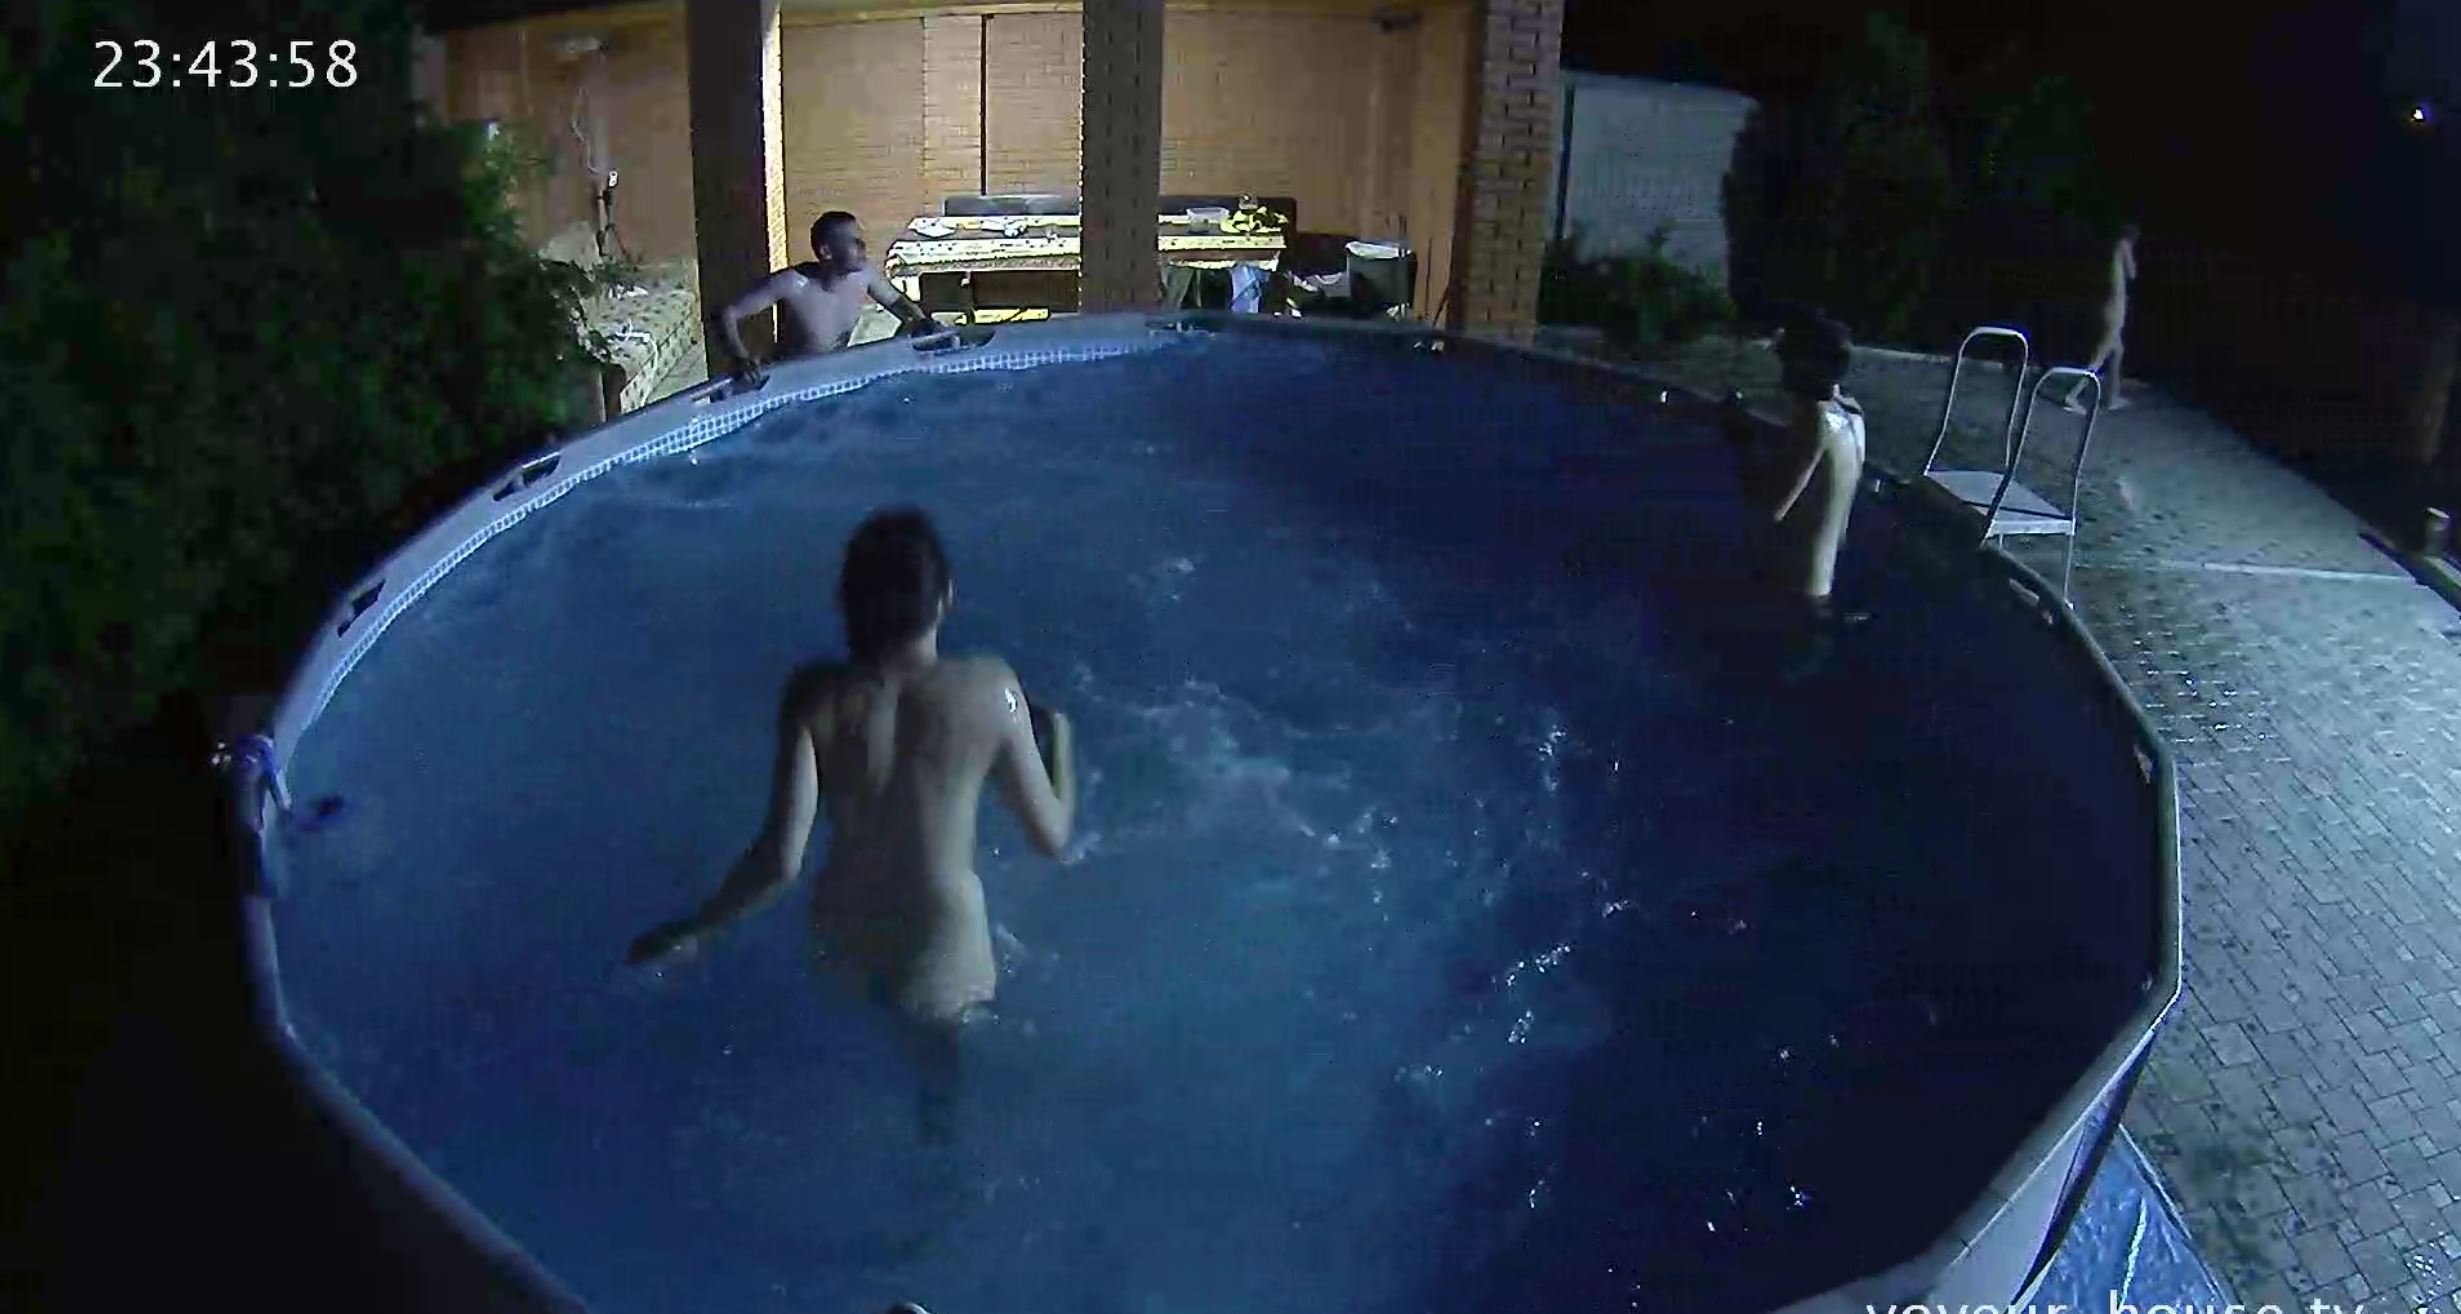 Lena and Peter skinny dipping while othes watch